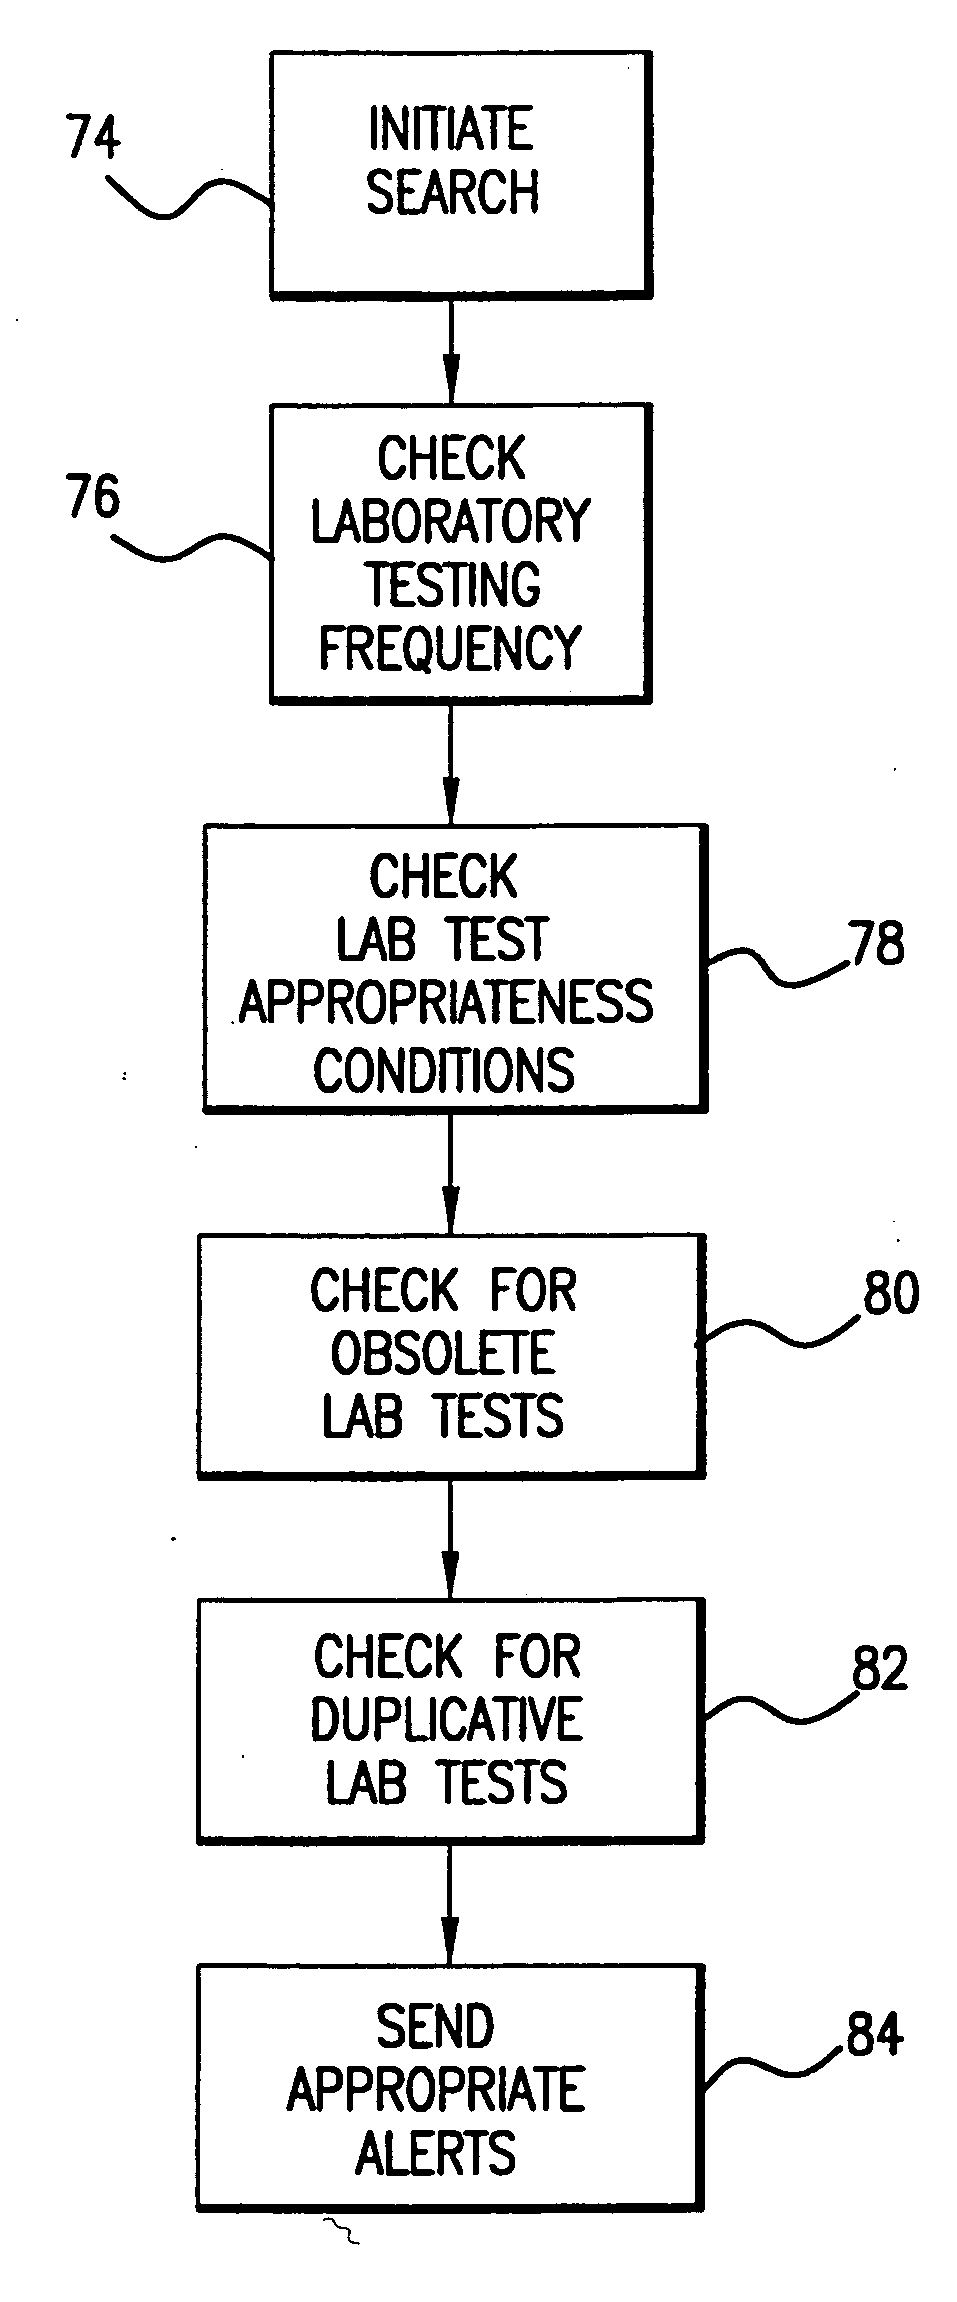 System for monitoring regulation of pharmaceuticals from data structure of medical and laboratory records